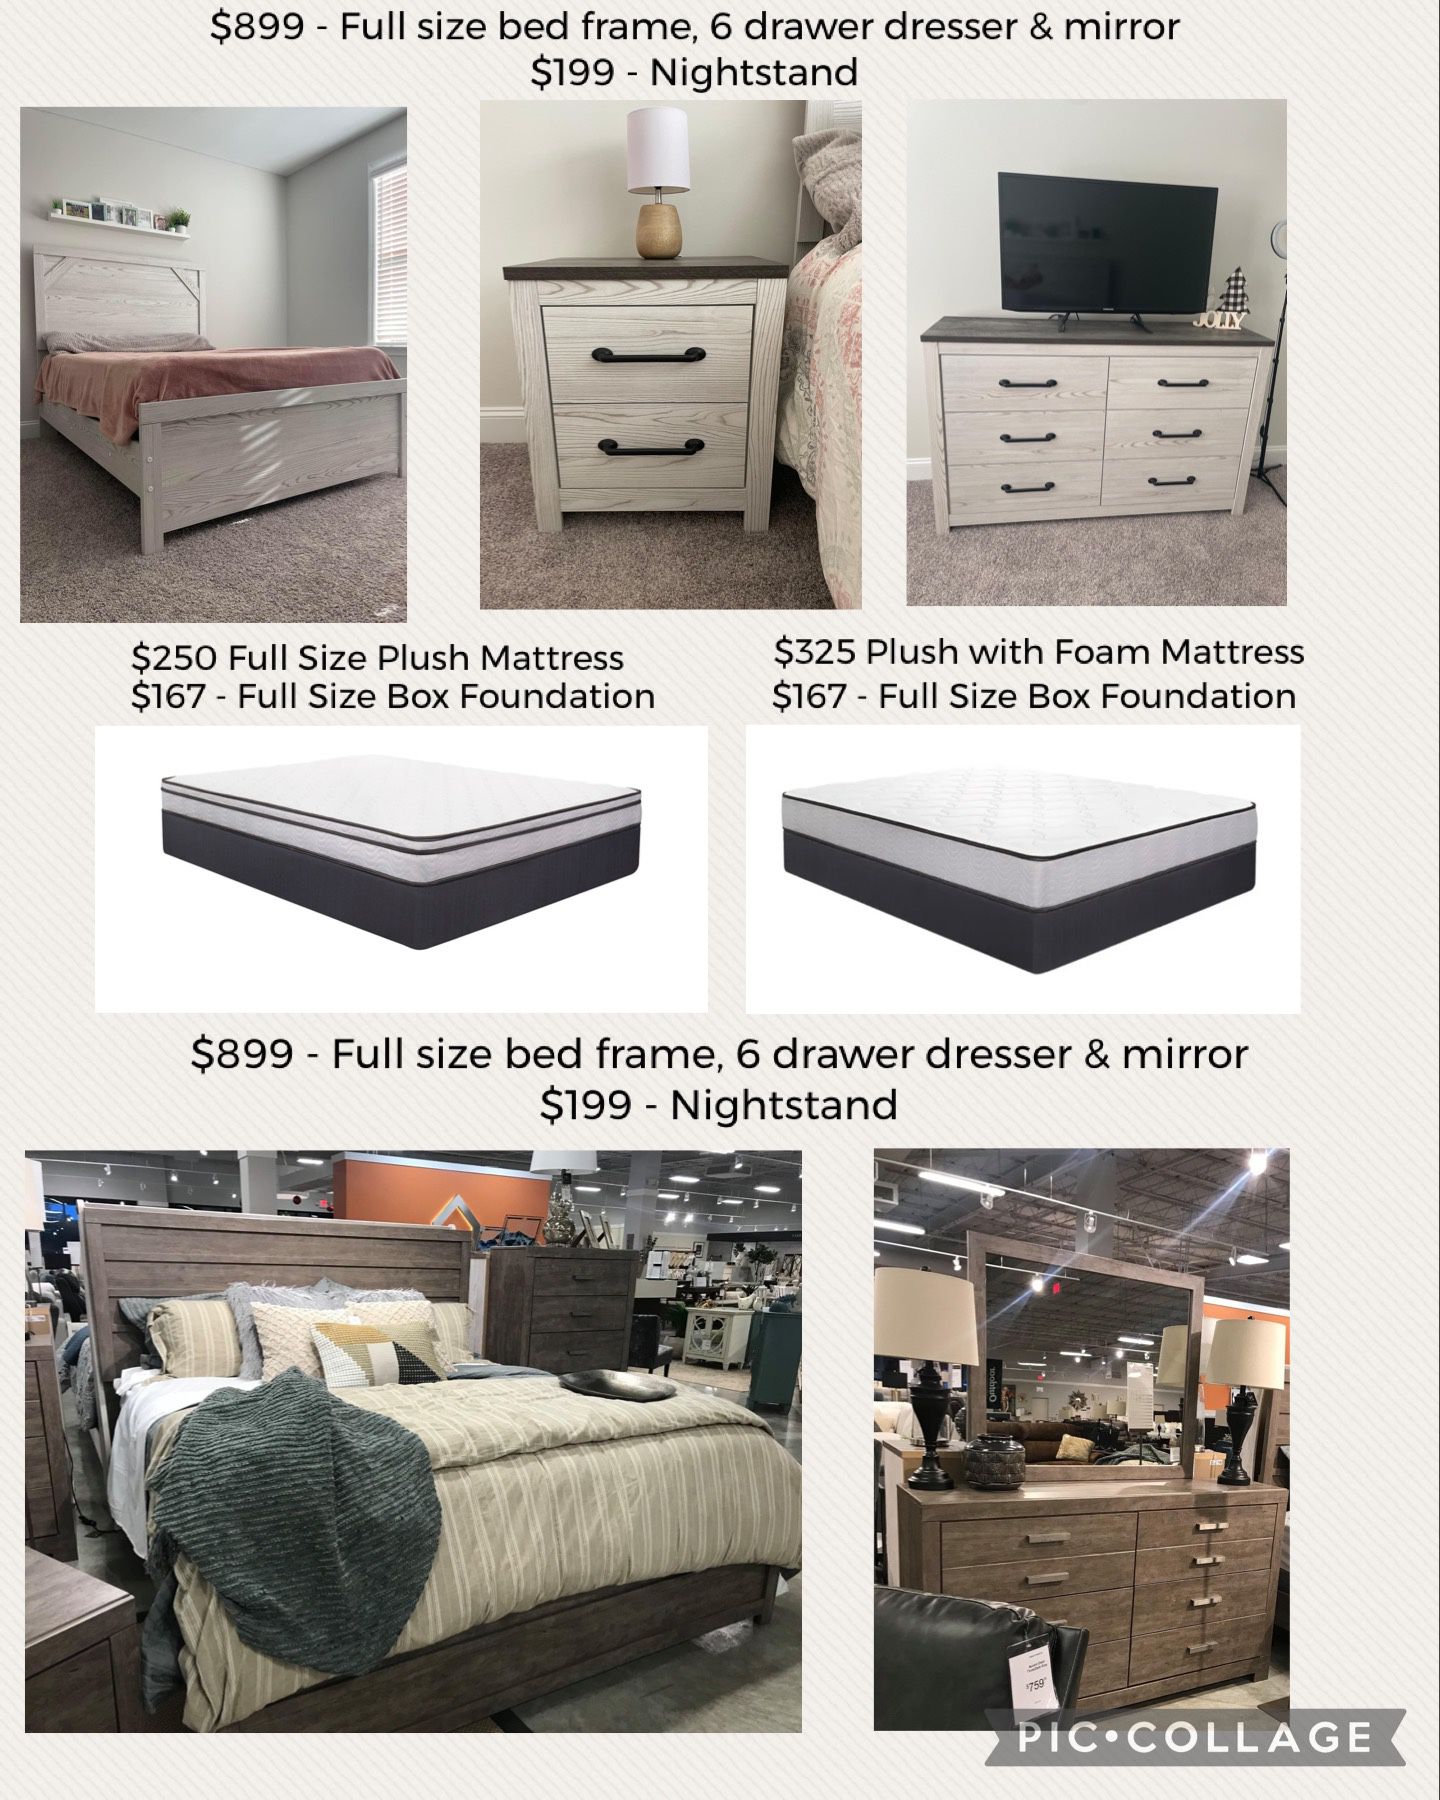 Full Size Bedroom And Mattress Sets - Pricing Shown On Photo 